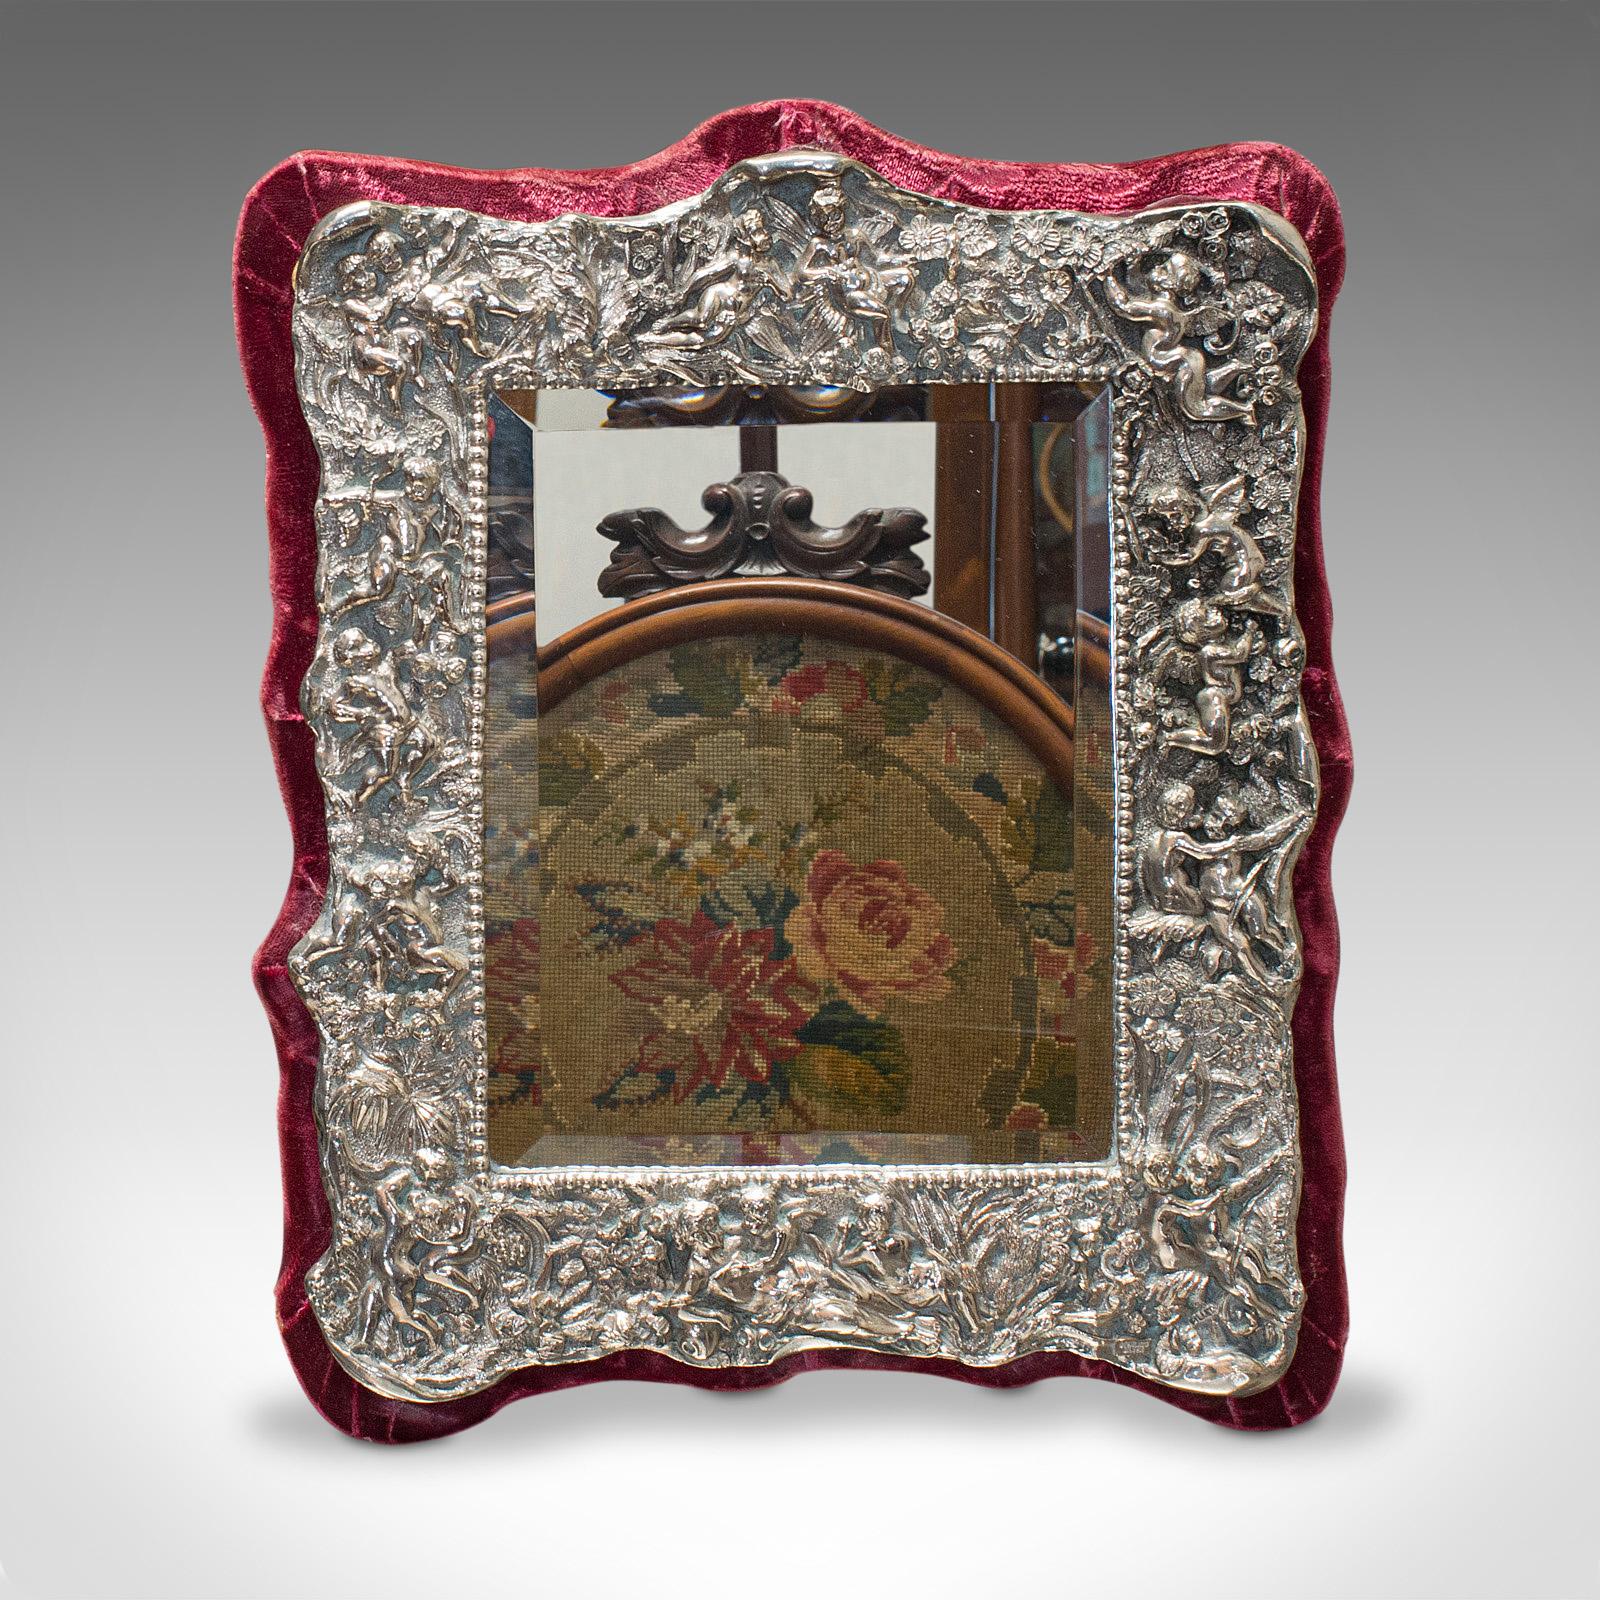 This is a vintage decorative mirror. An English, sterling silver and glass mirror, dating to the mid-20th century, circa 1950.

Ornate mirror frame with vibrant color
Displays a desirable aged patina
Sterling silver frame in good order
Original